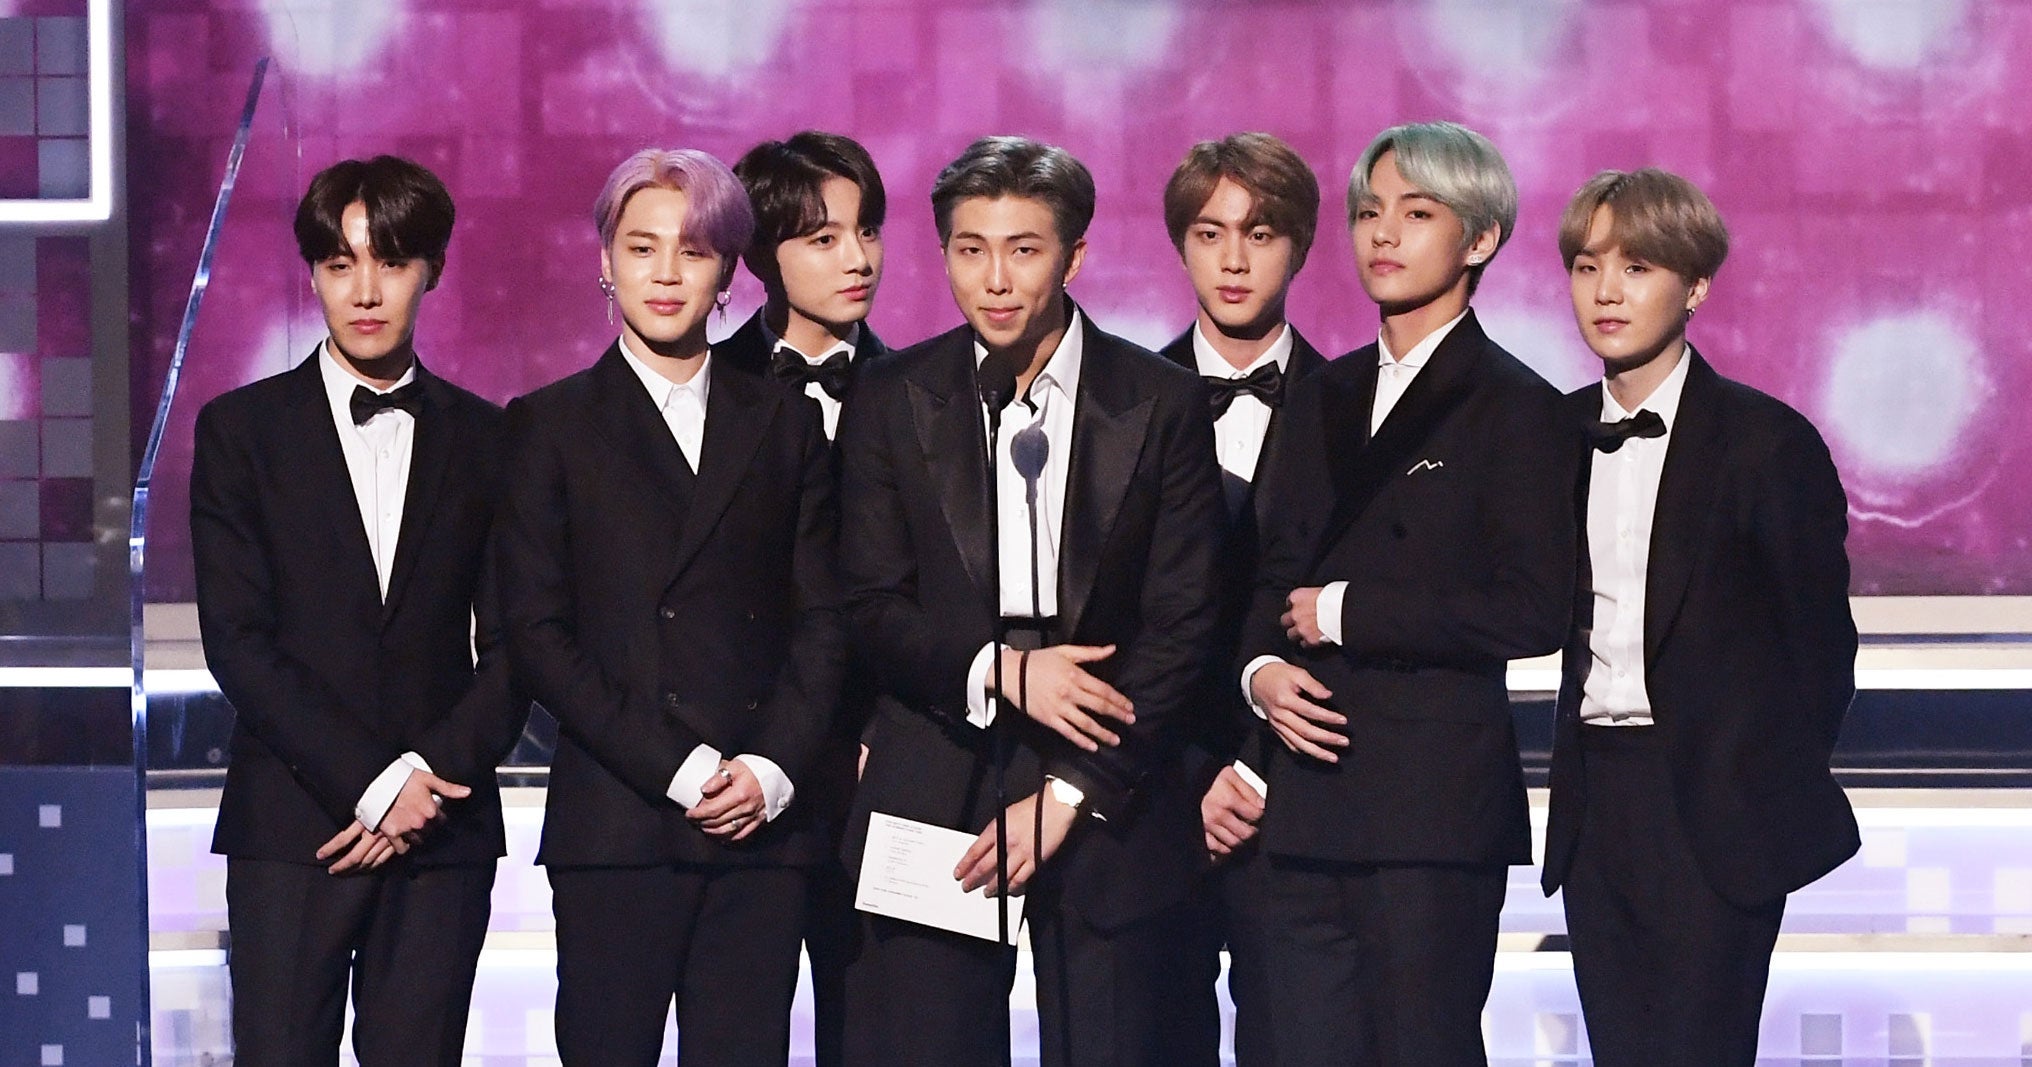 The most popular boy band in today's time, BTS, is winning hearts and world records.